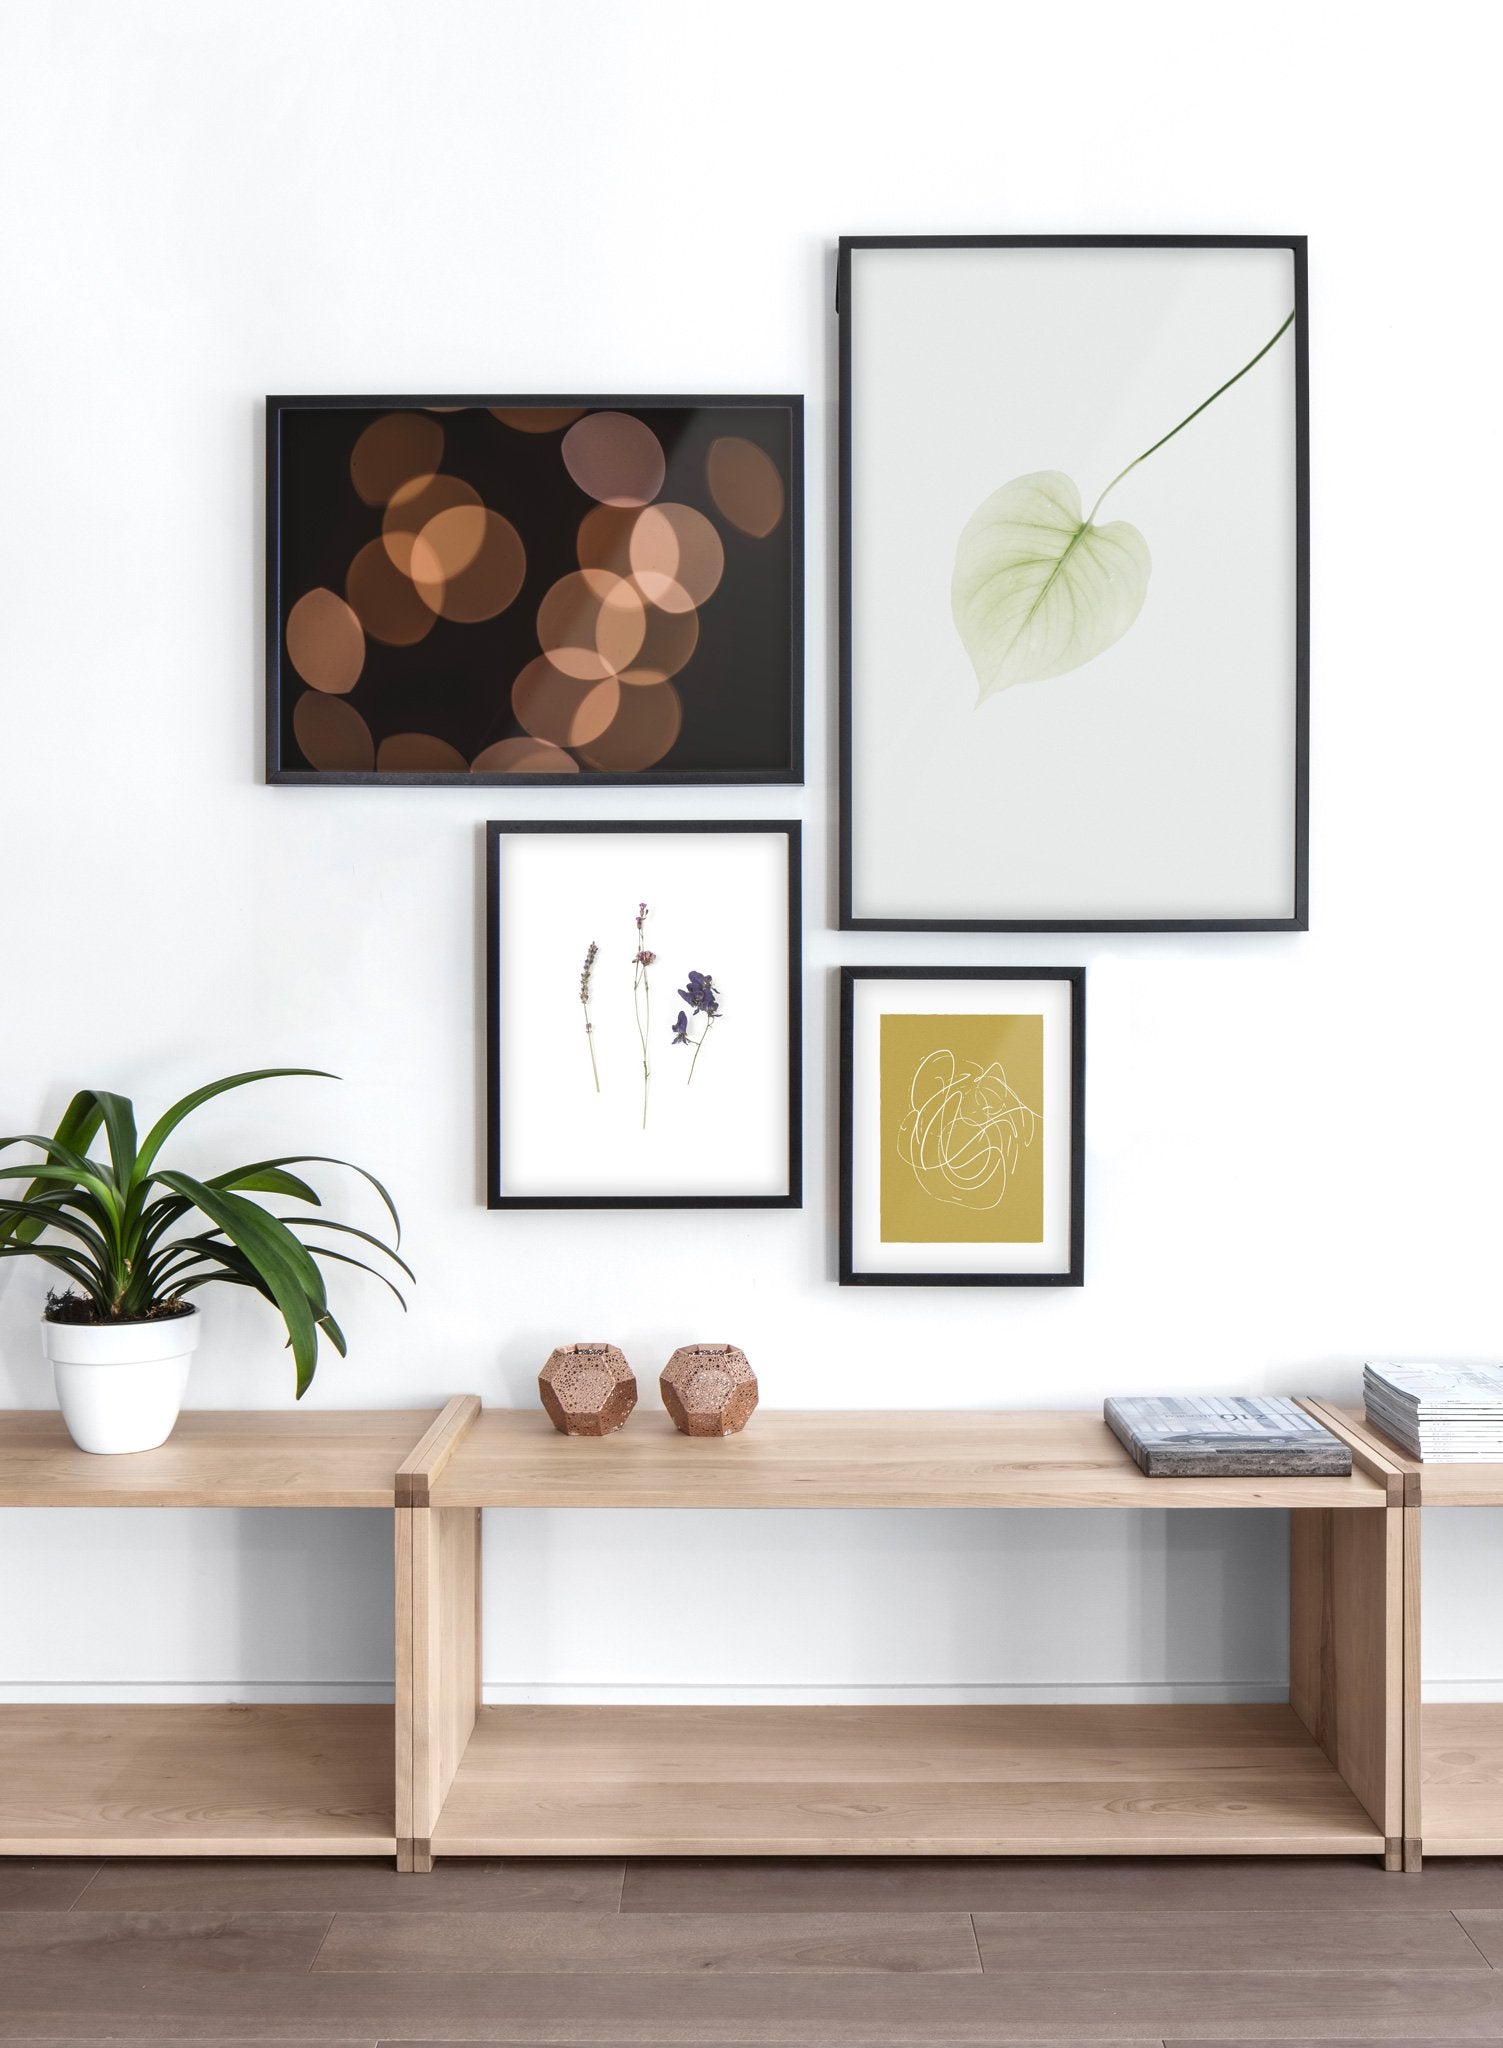 Light Reflections modern minimalist photography poster by Opposite Wall - Living room with gallery wall